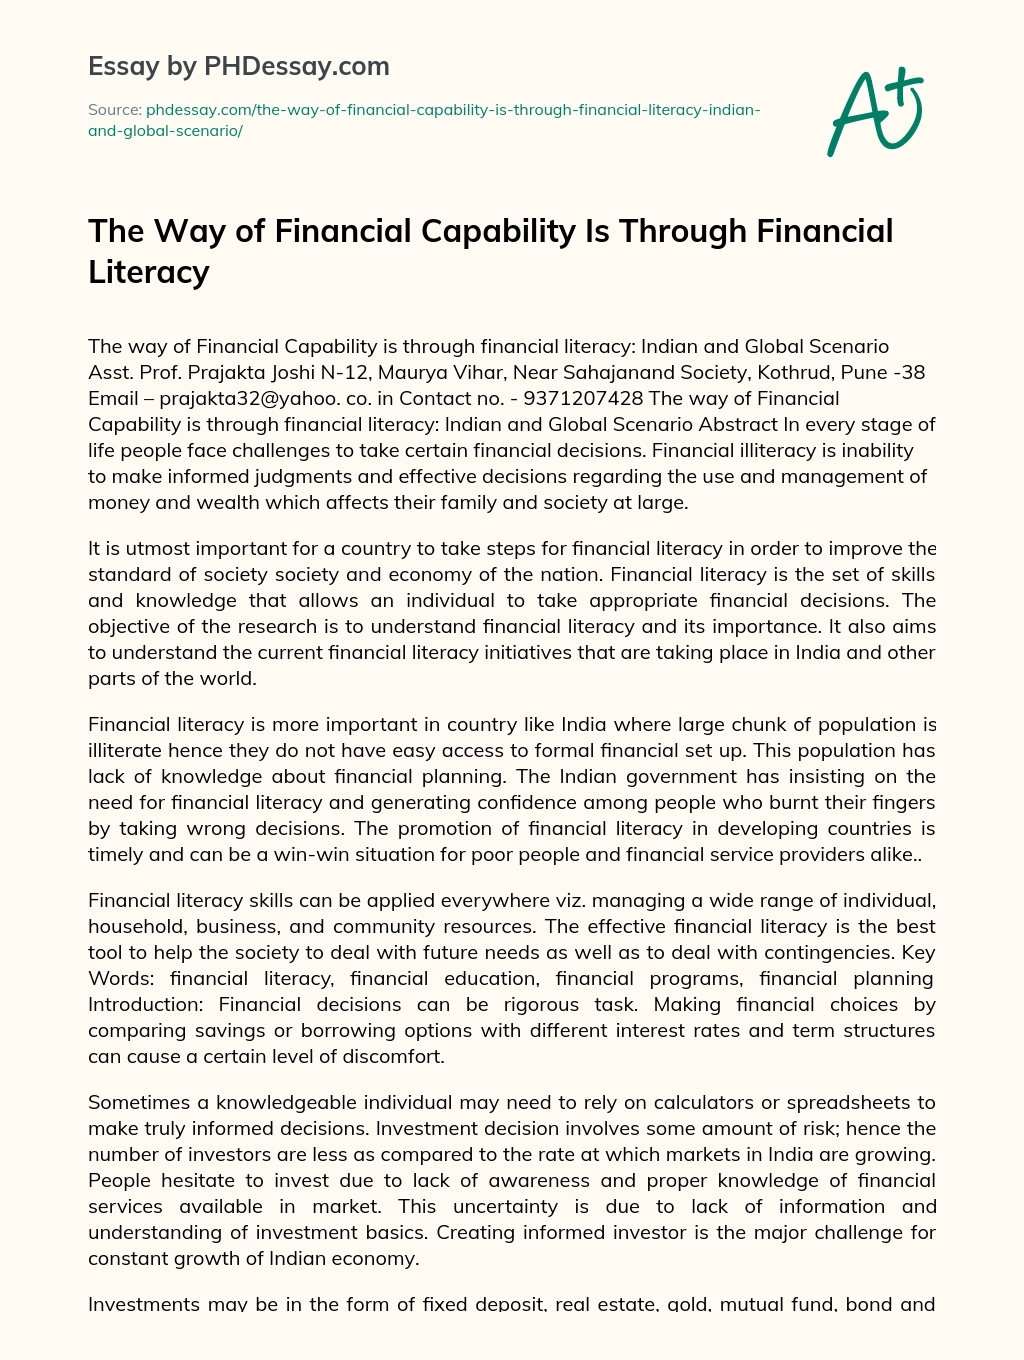 Essay on financial literacy successful forex trading